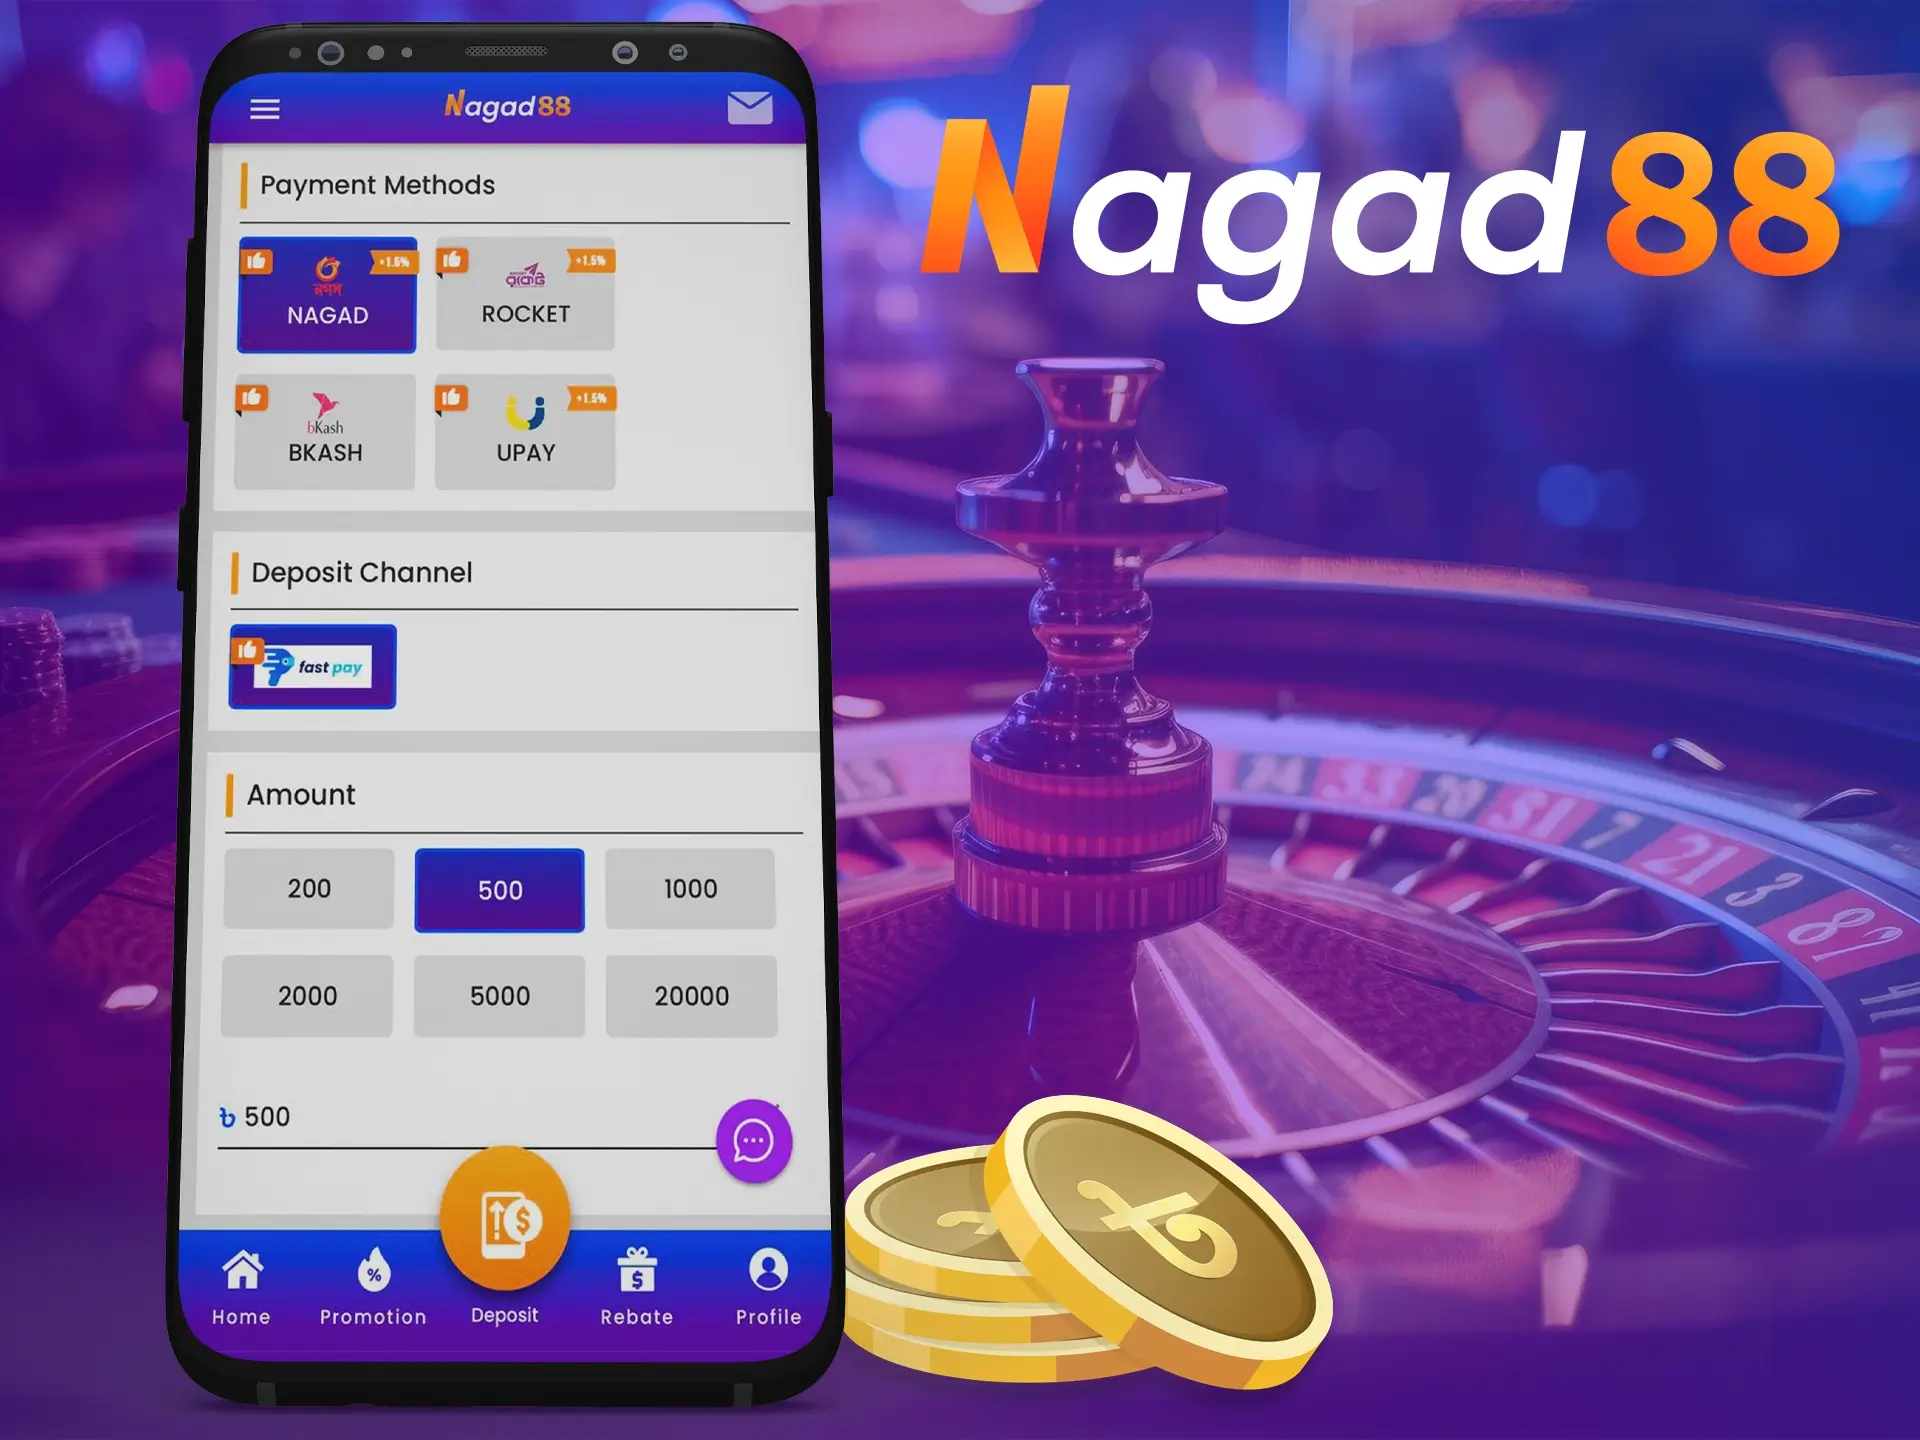 Fund your account at Nagad88 Casino in a way that is convenient for you.